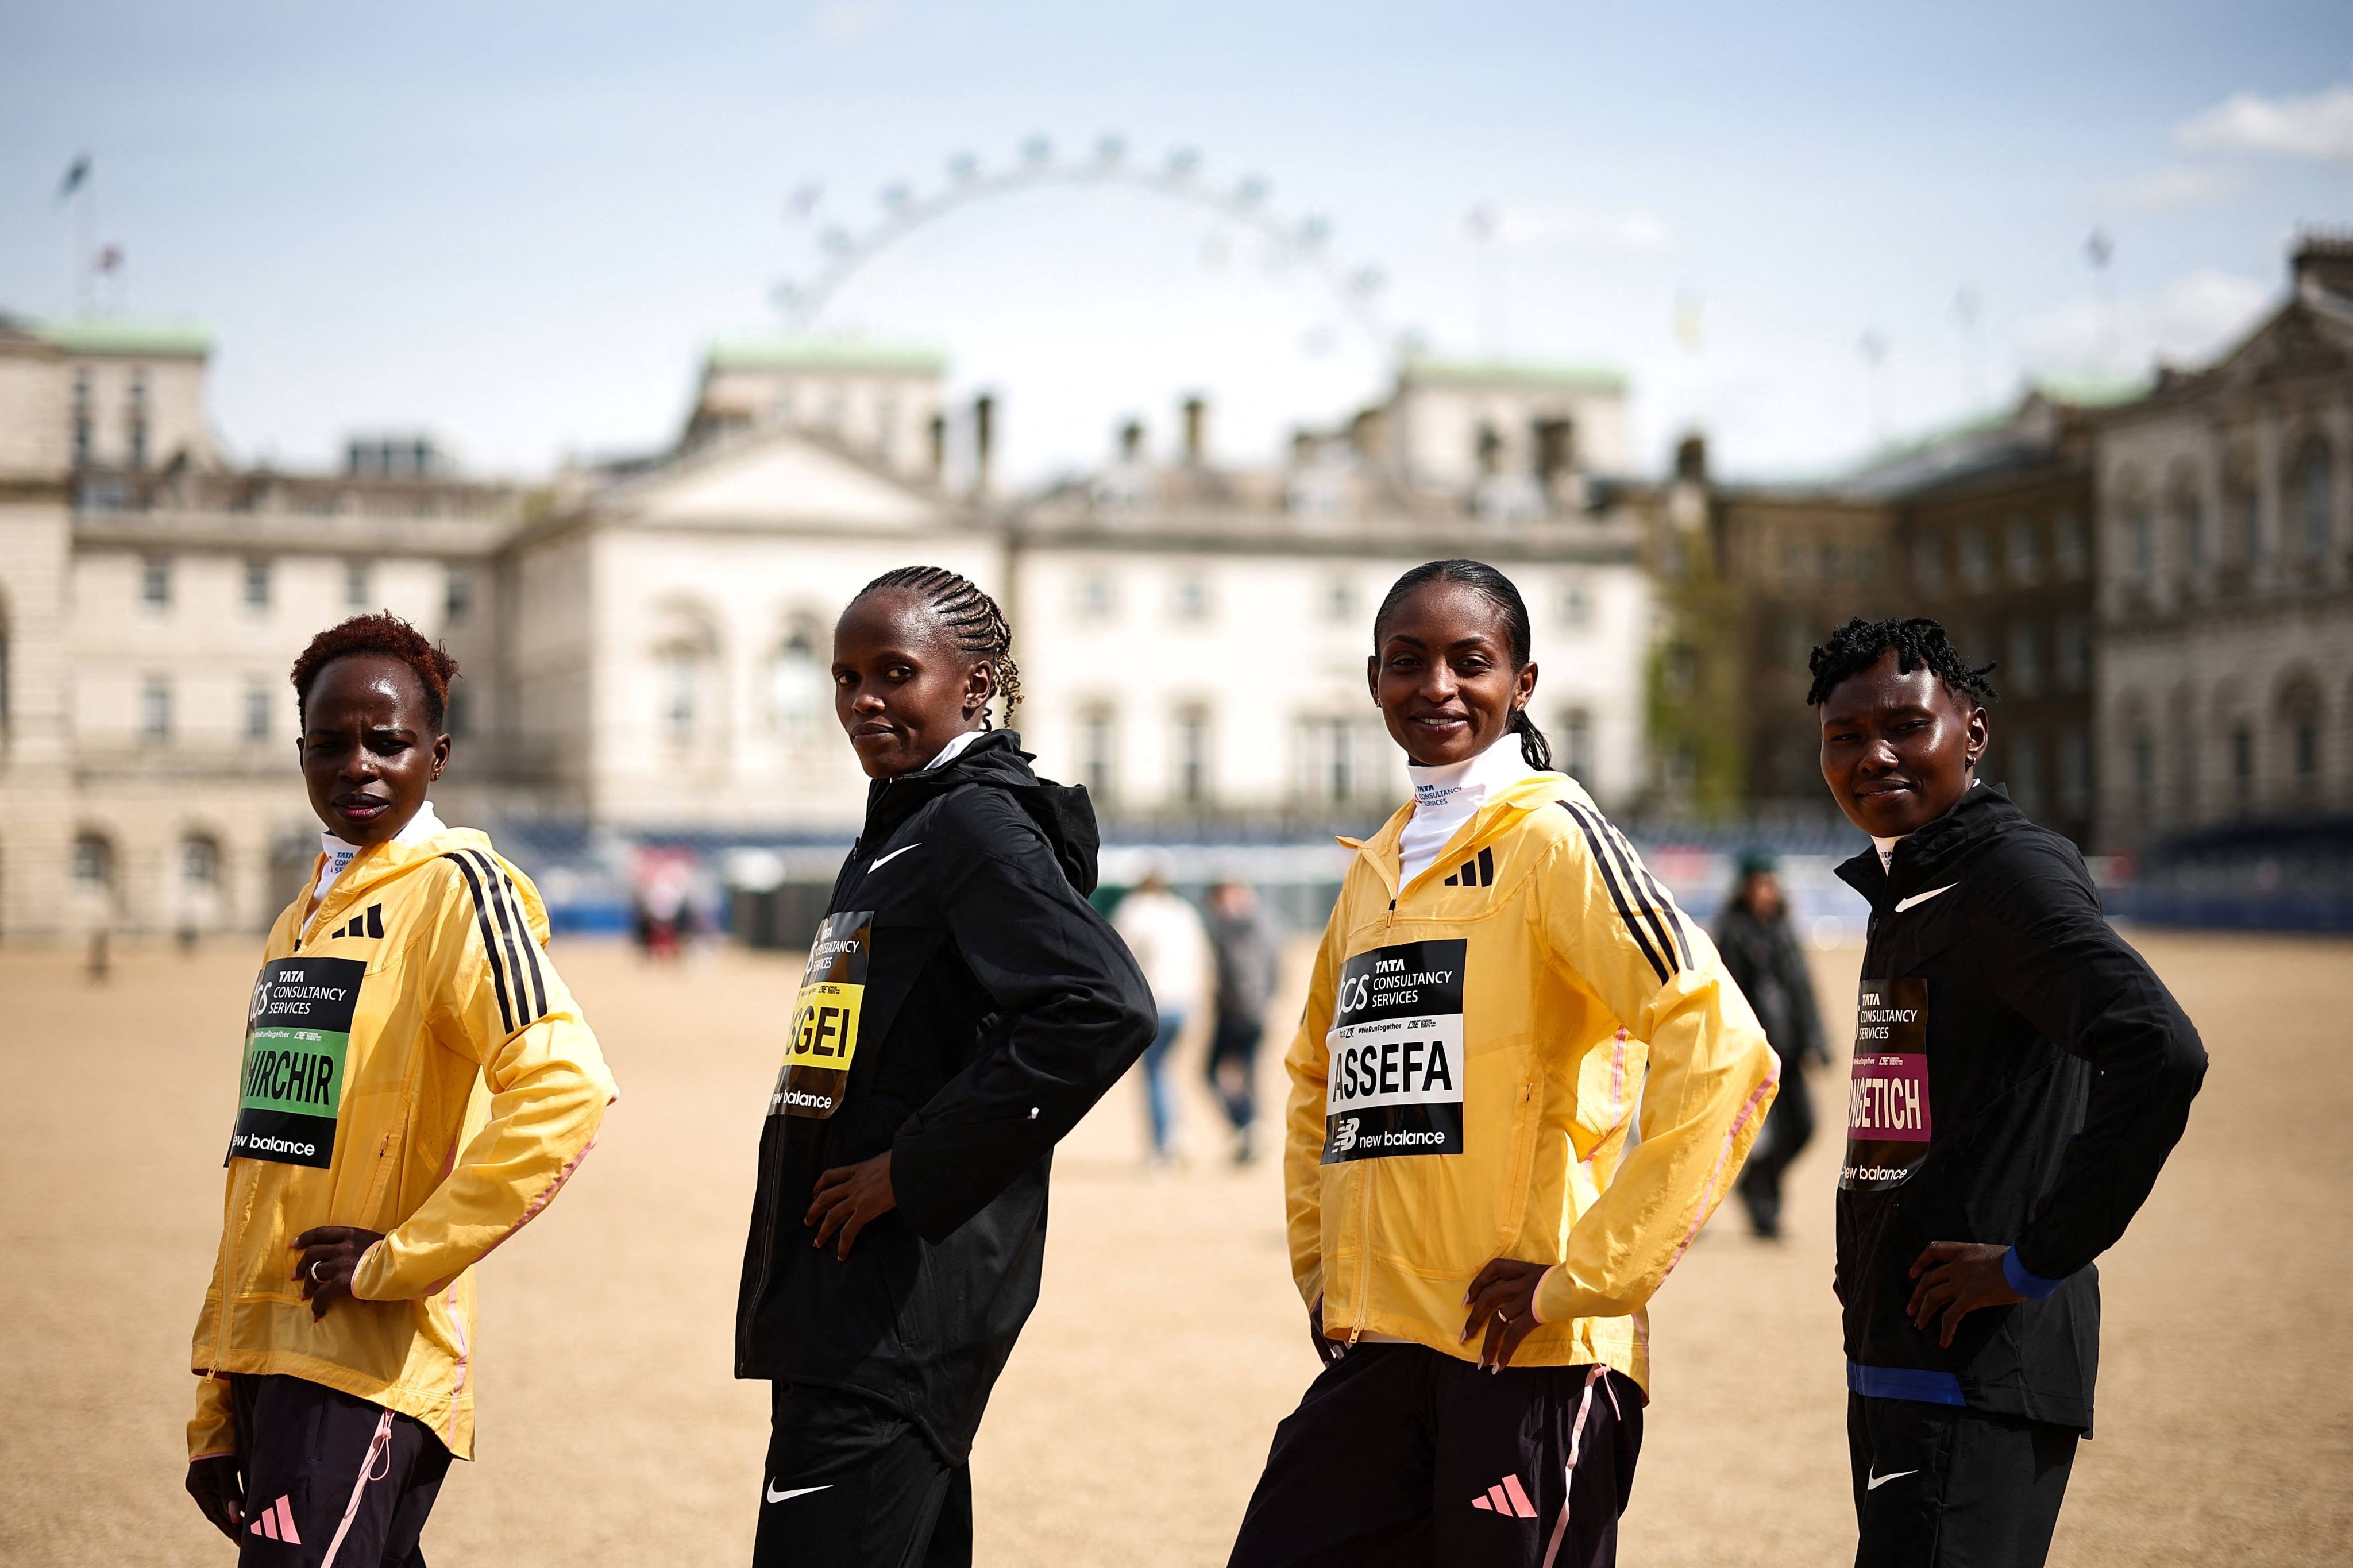 (From left) Olympic champion Peres Jepchirchir, previous world record holder Brigid Kosgei, Tigist Assefa and Ruth Chepngetich, the fourth-fastest woman of all time, at the Horse Guards Parade ahead of the London Marathon. Photo: AFP